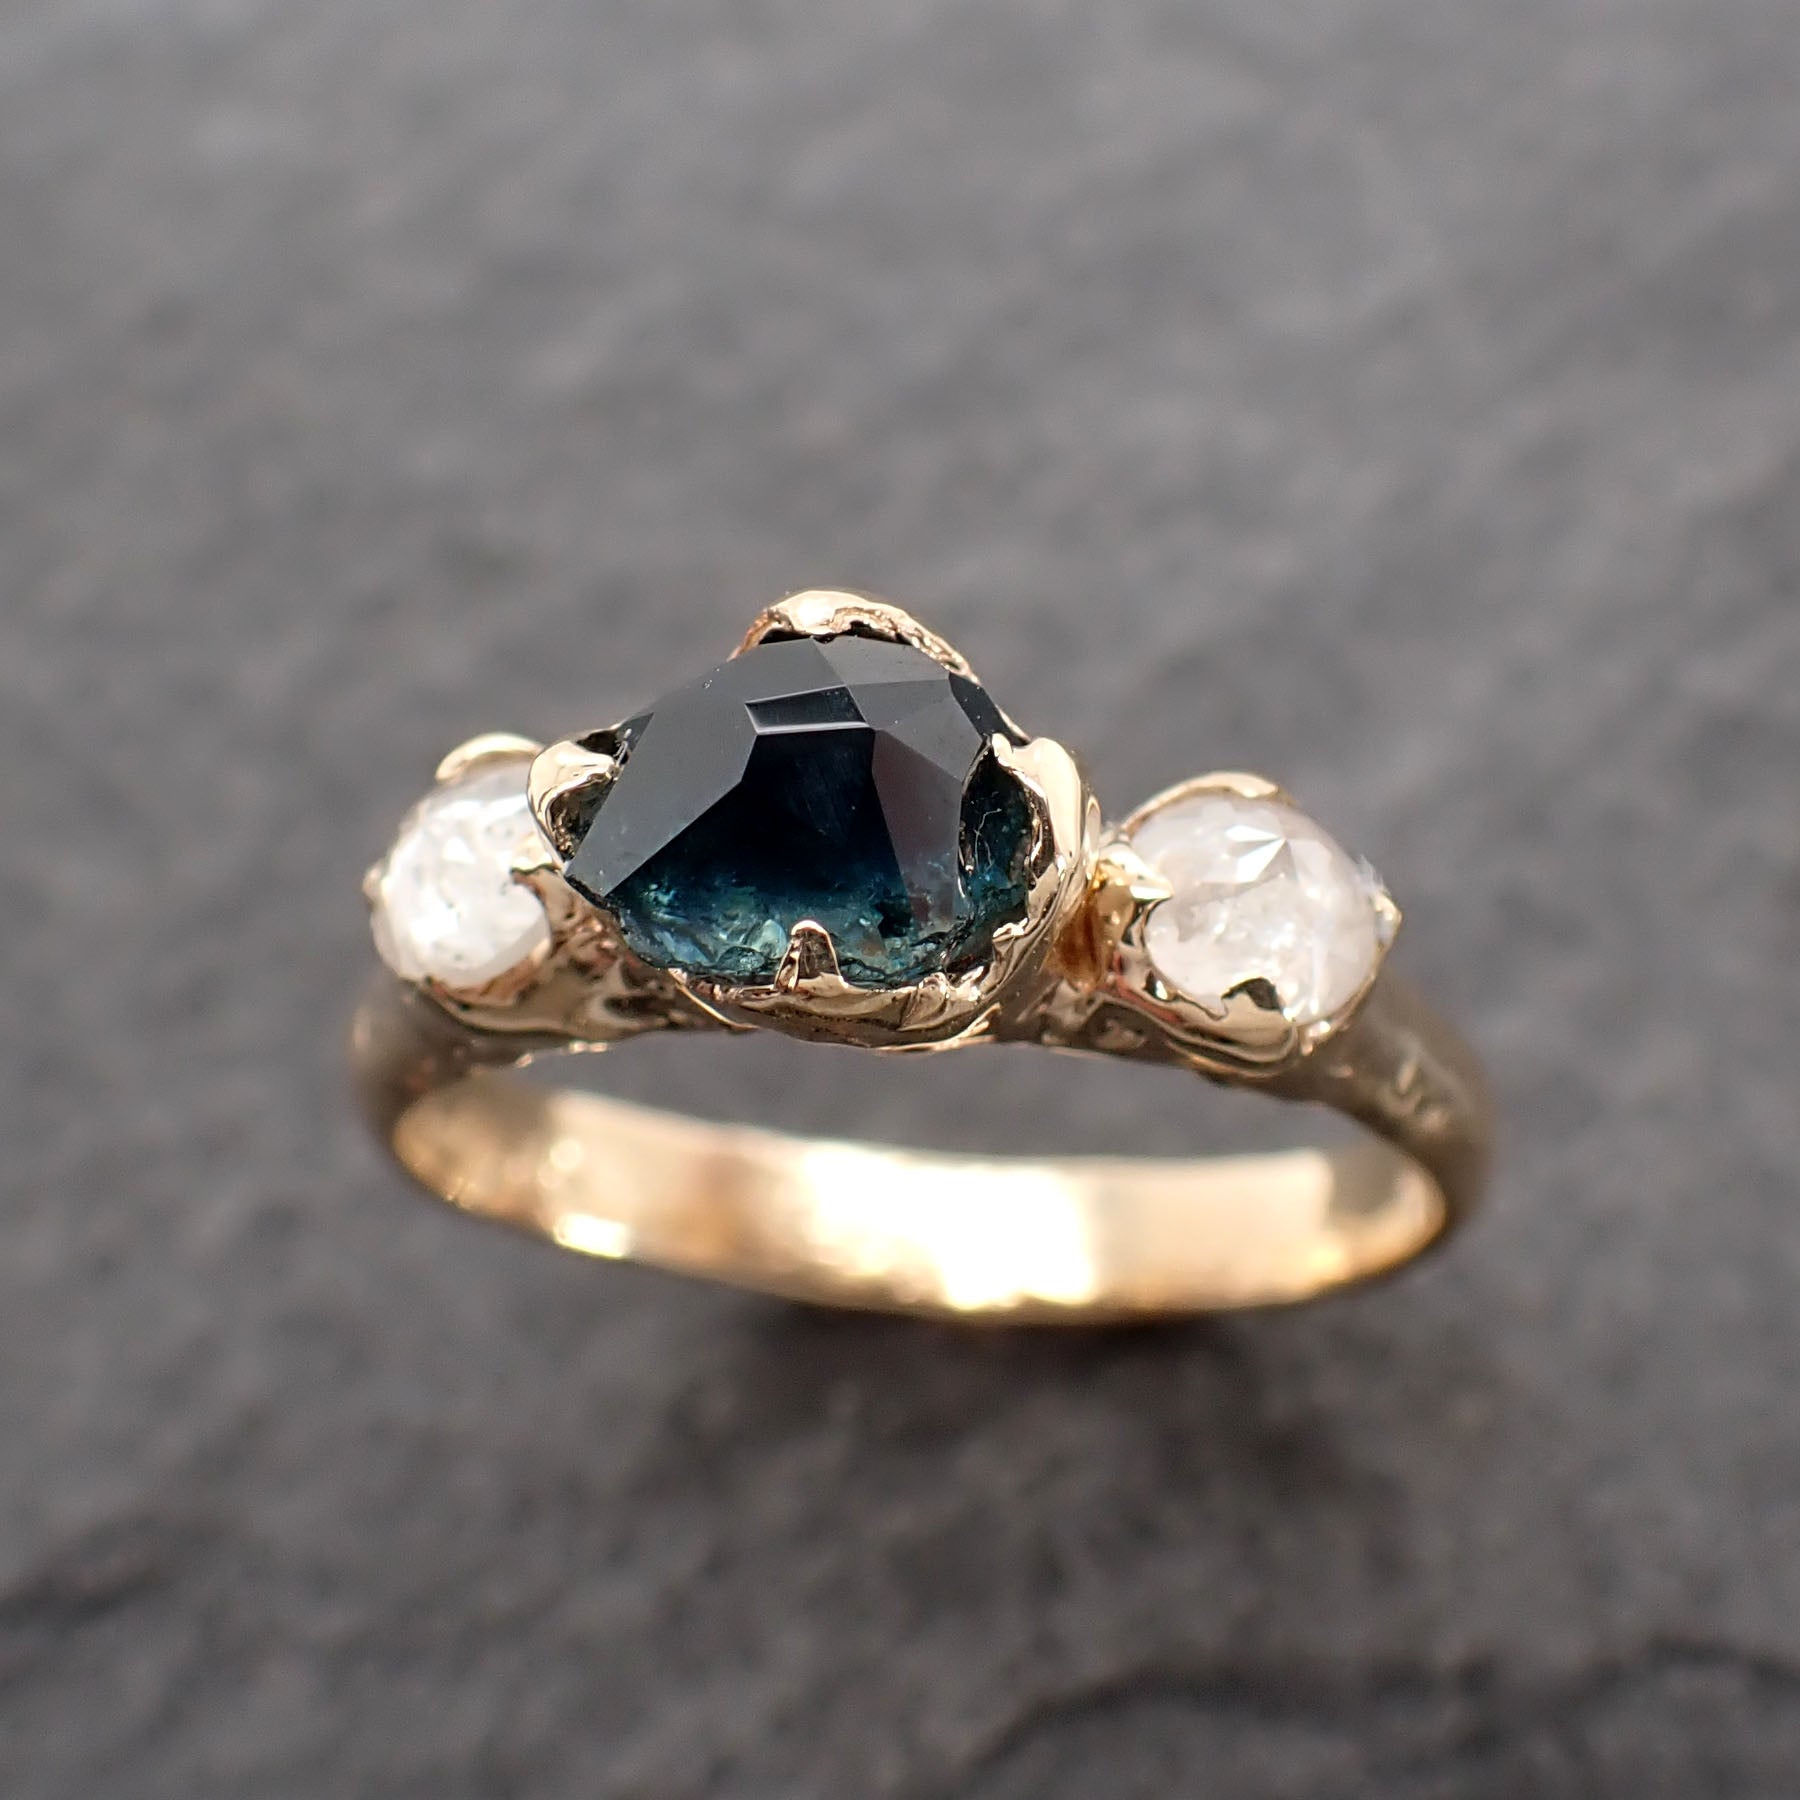 Partially faceted blue Montana Sapphire and fancy Diamonds 14k Yellow Gold Engagement Wedding Ring Gemstone Ring Multi stone Ring 2489